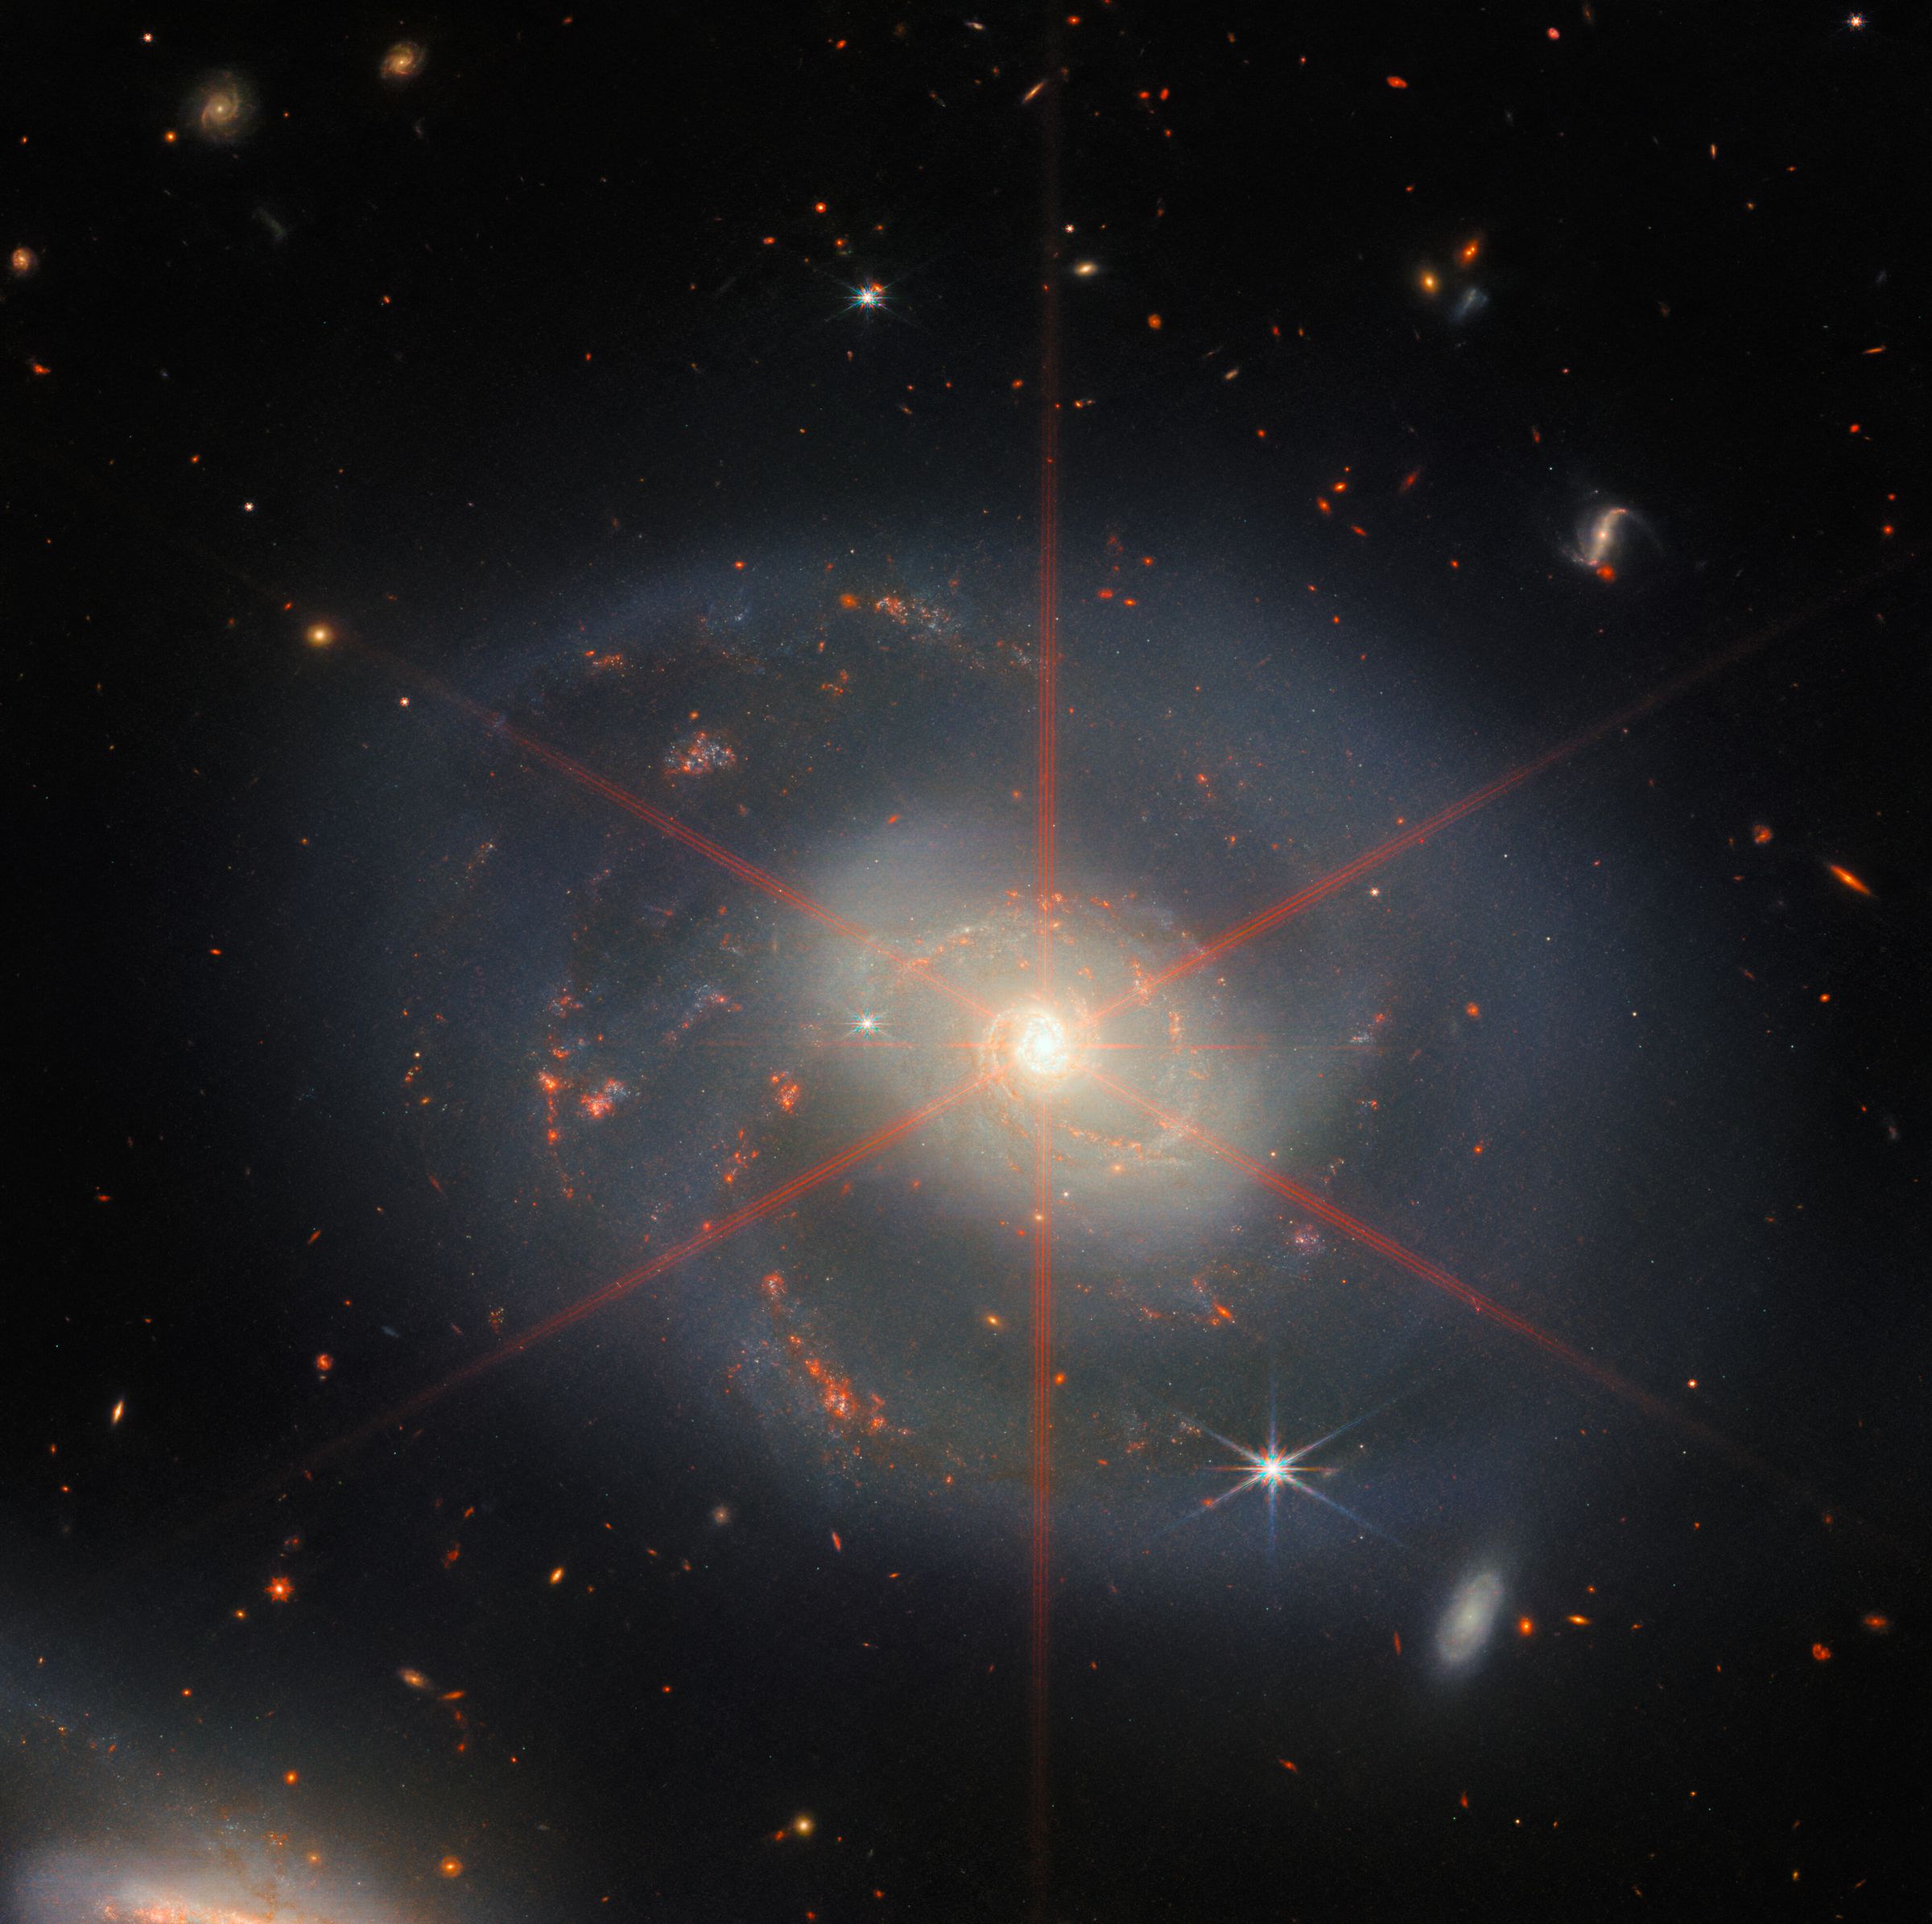 This image shows the spiral galaxy that dominates the bright central region.  The galaxy has blue-purple regions with orange regions filled with stars.  There is also a large visible diffraction peak that appears like a star in the central region of the galaxy.  Lots of stars and galaxies fill the scene